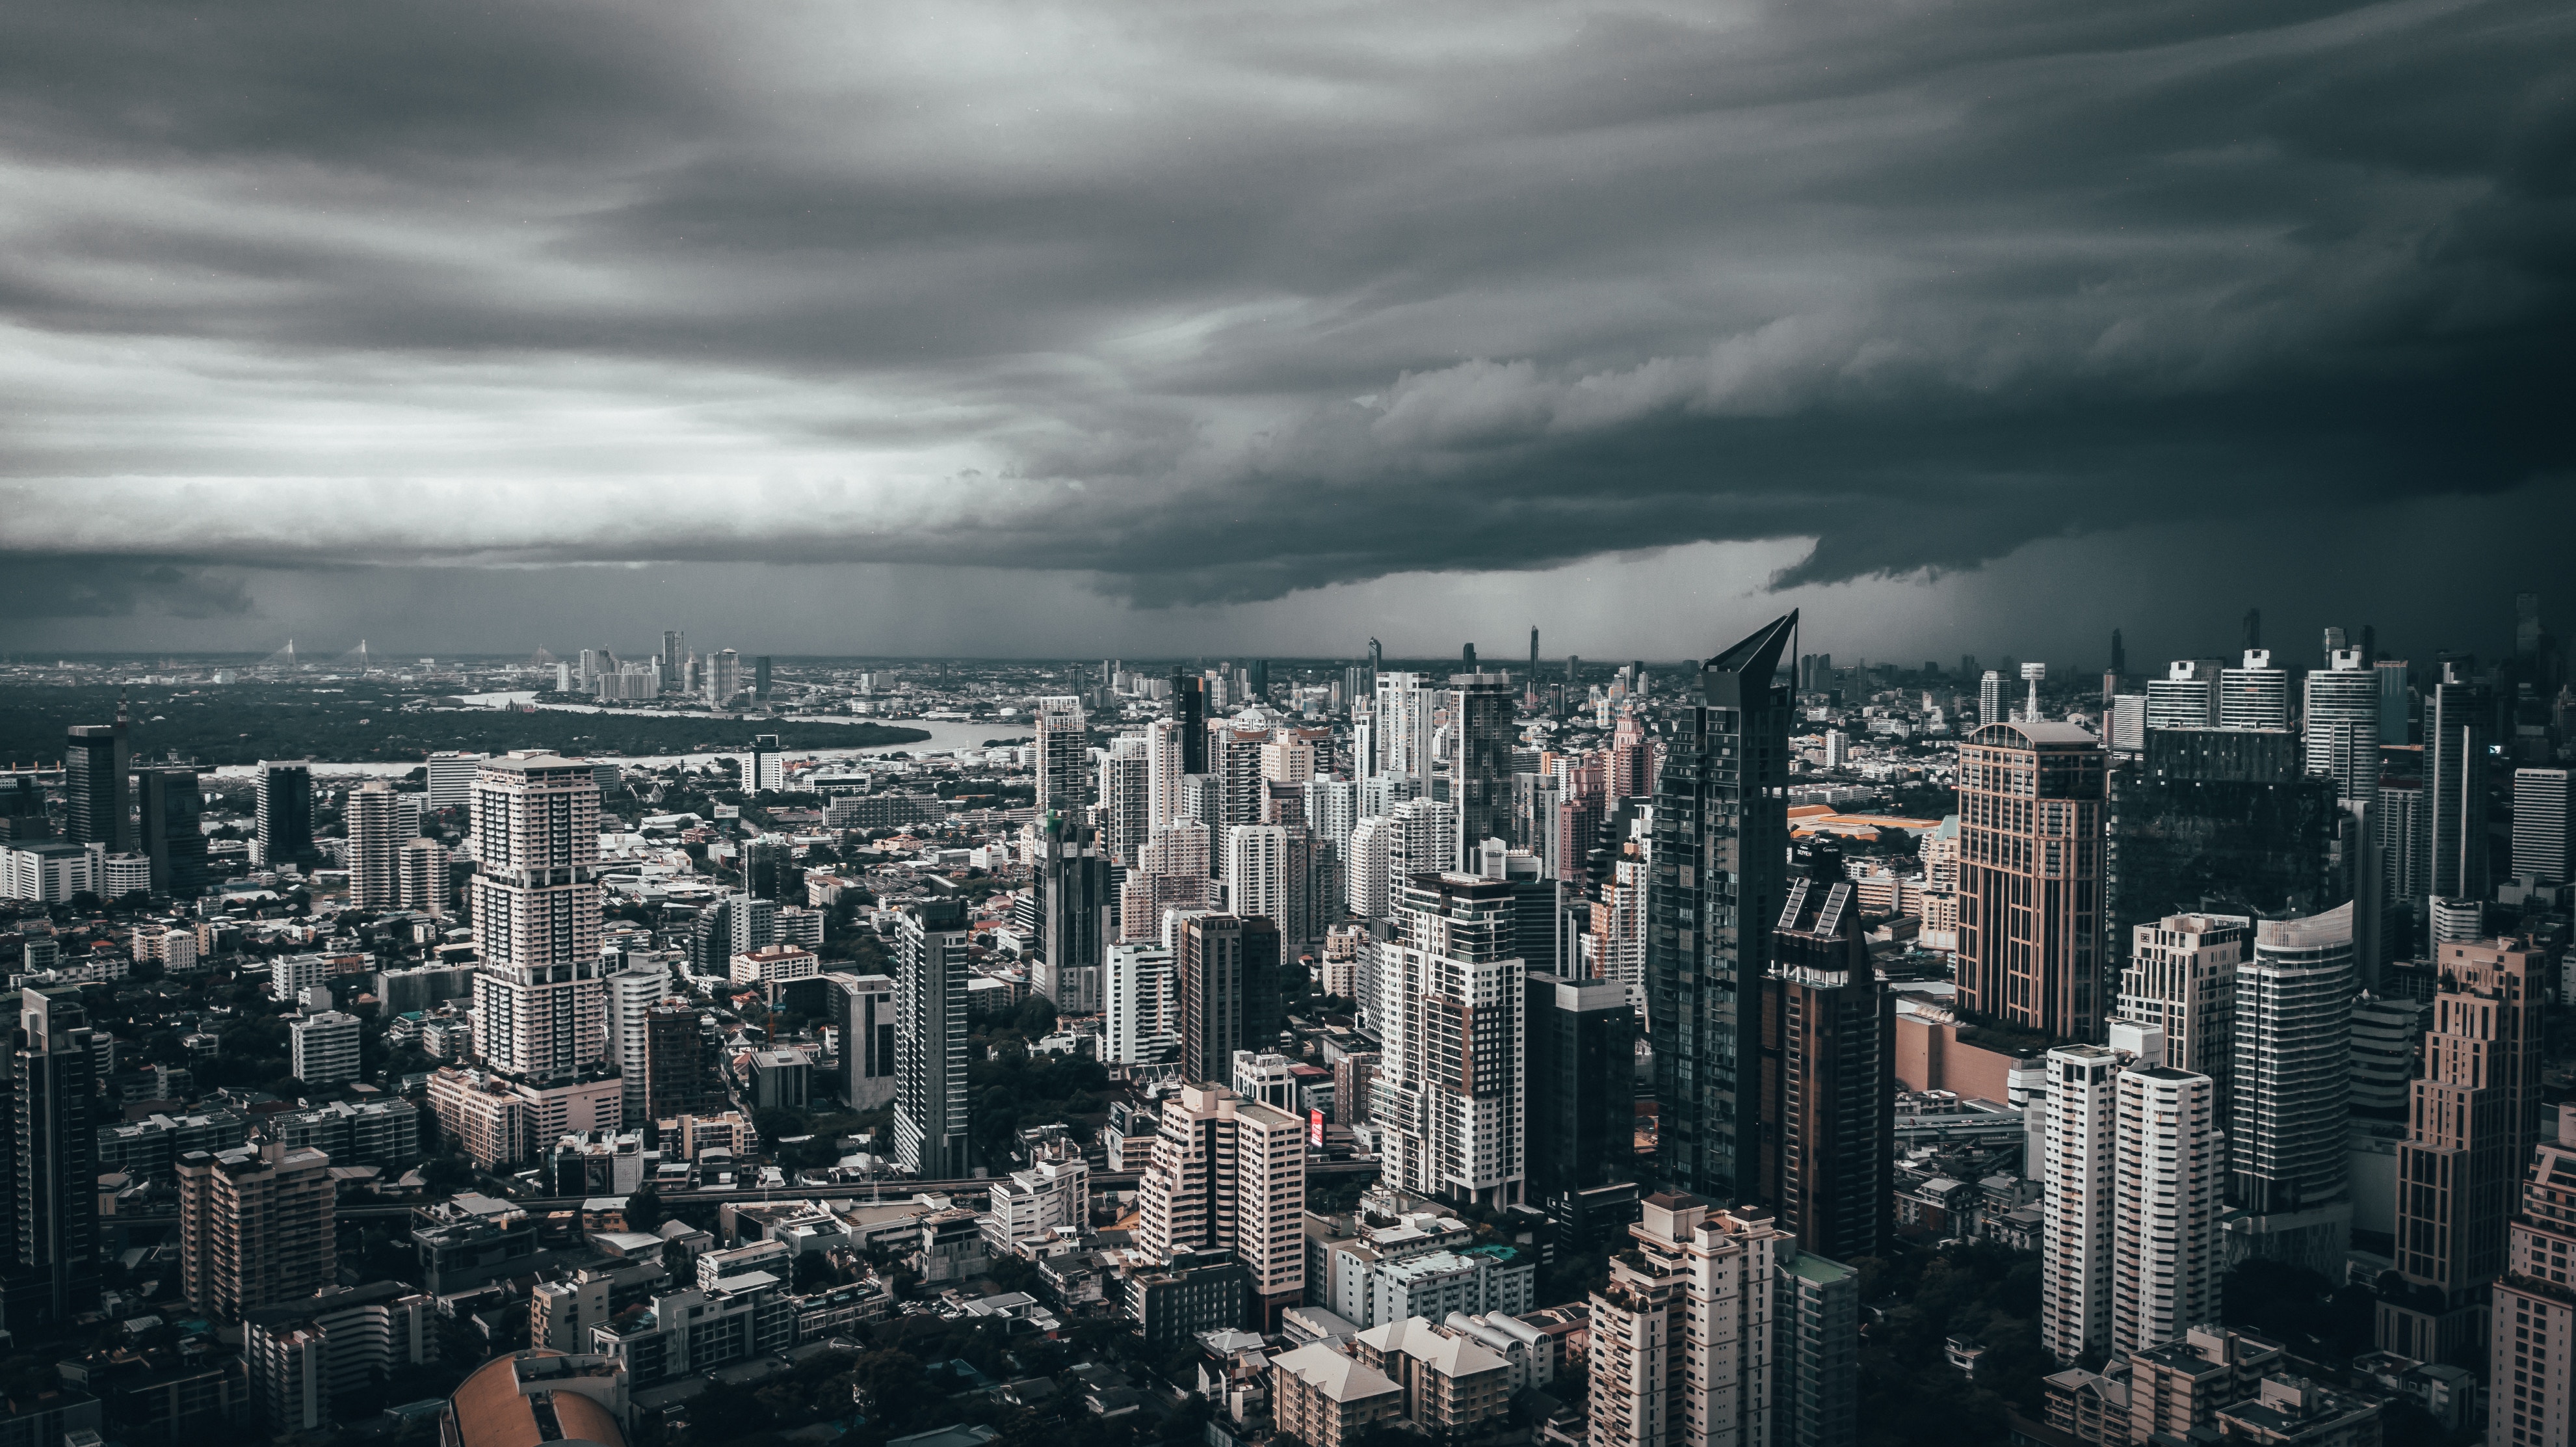 mainly cloudy, cities, clouds, city, view from above, skyscrapers, overcast